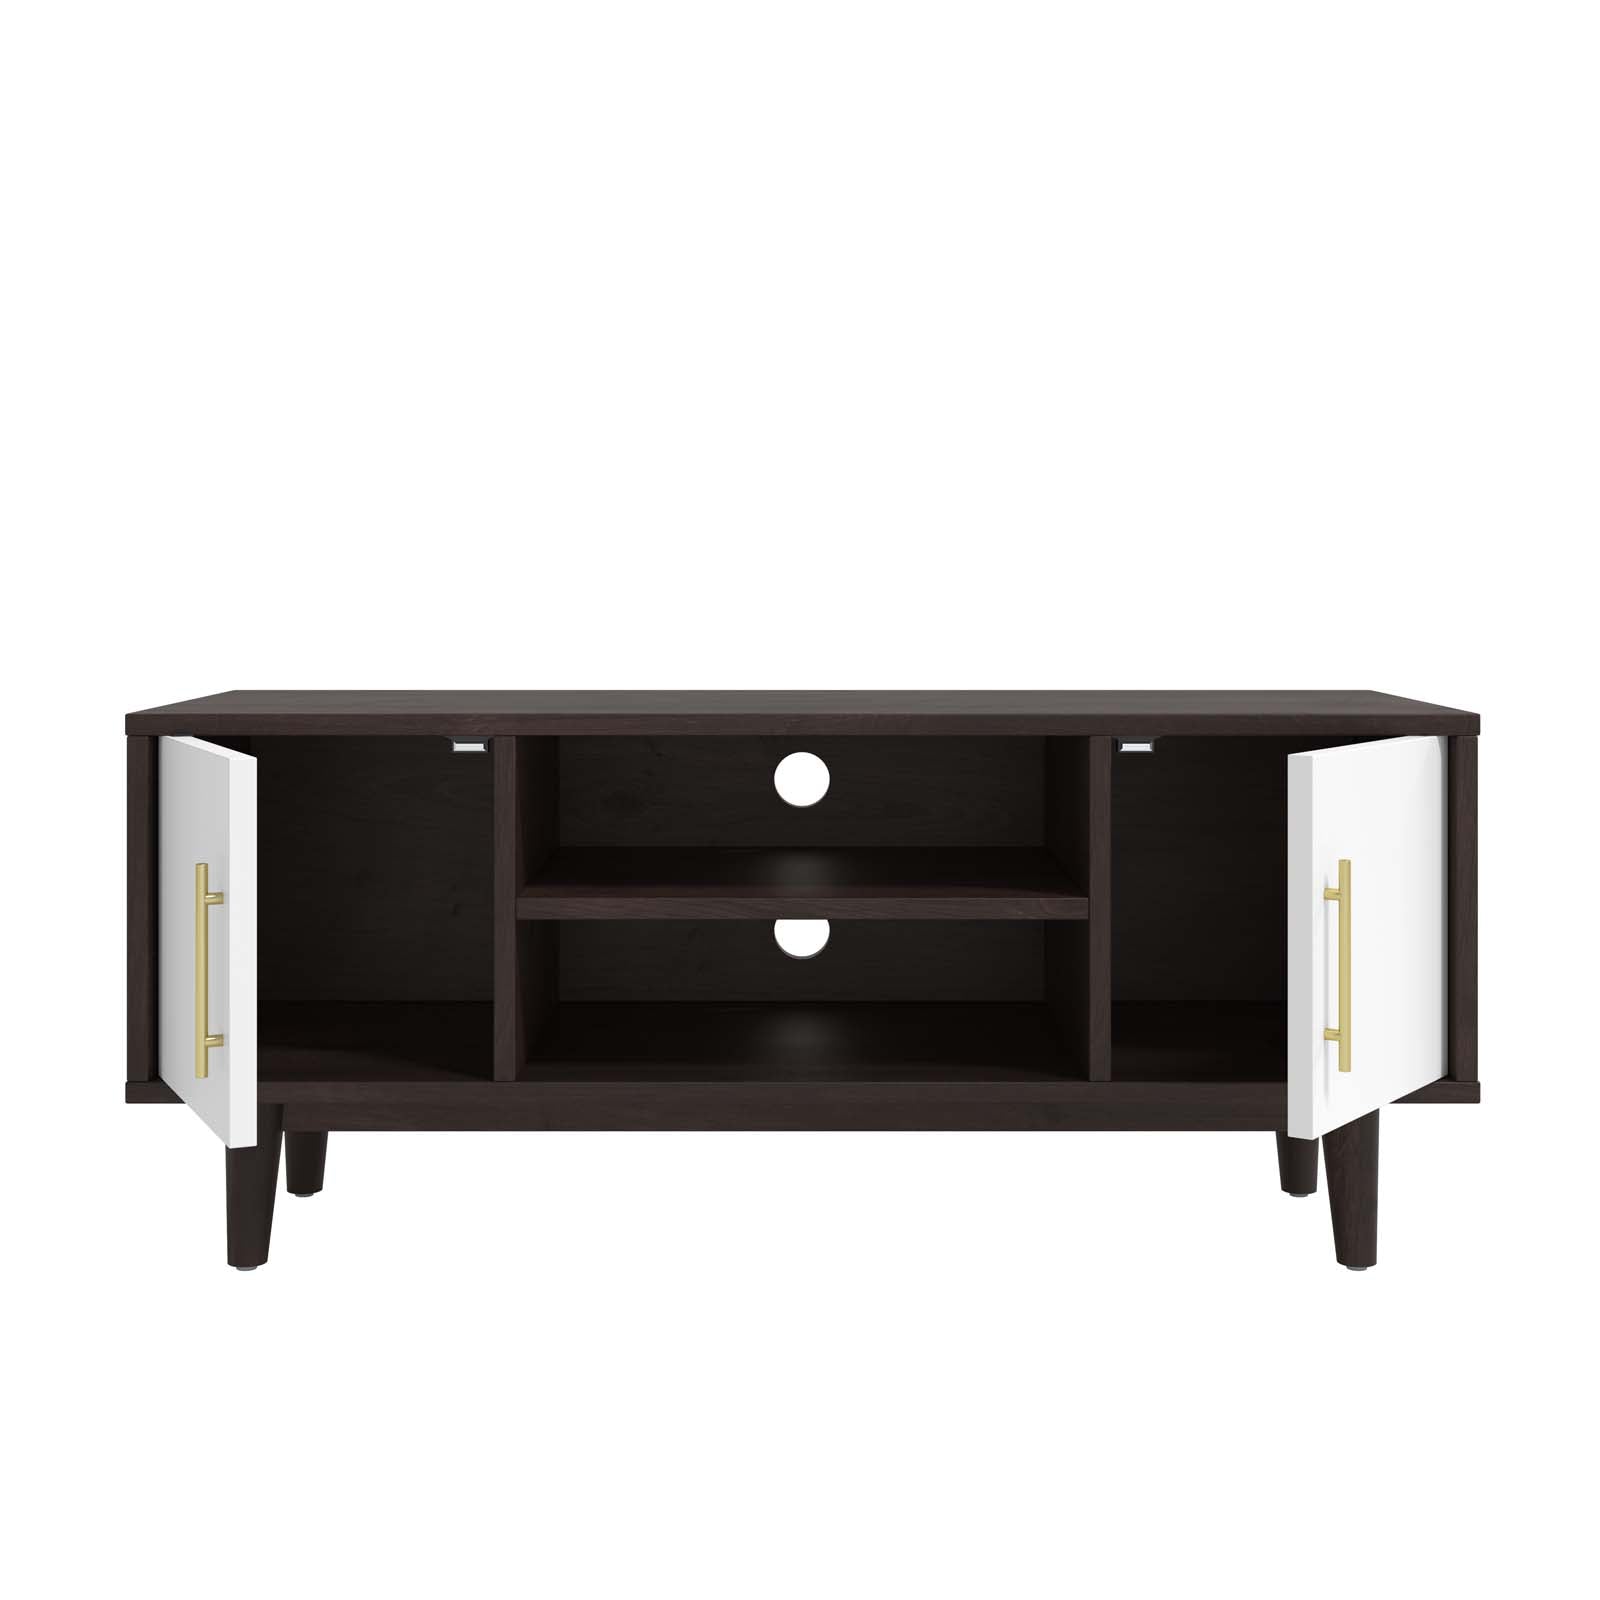 Modway TV & Media Units - Daxton 43" TV Stand Cappuccino White